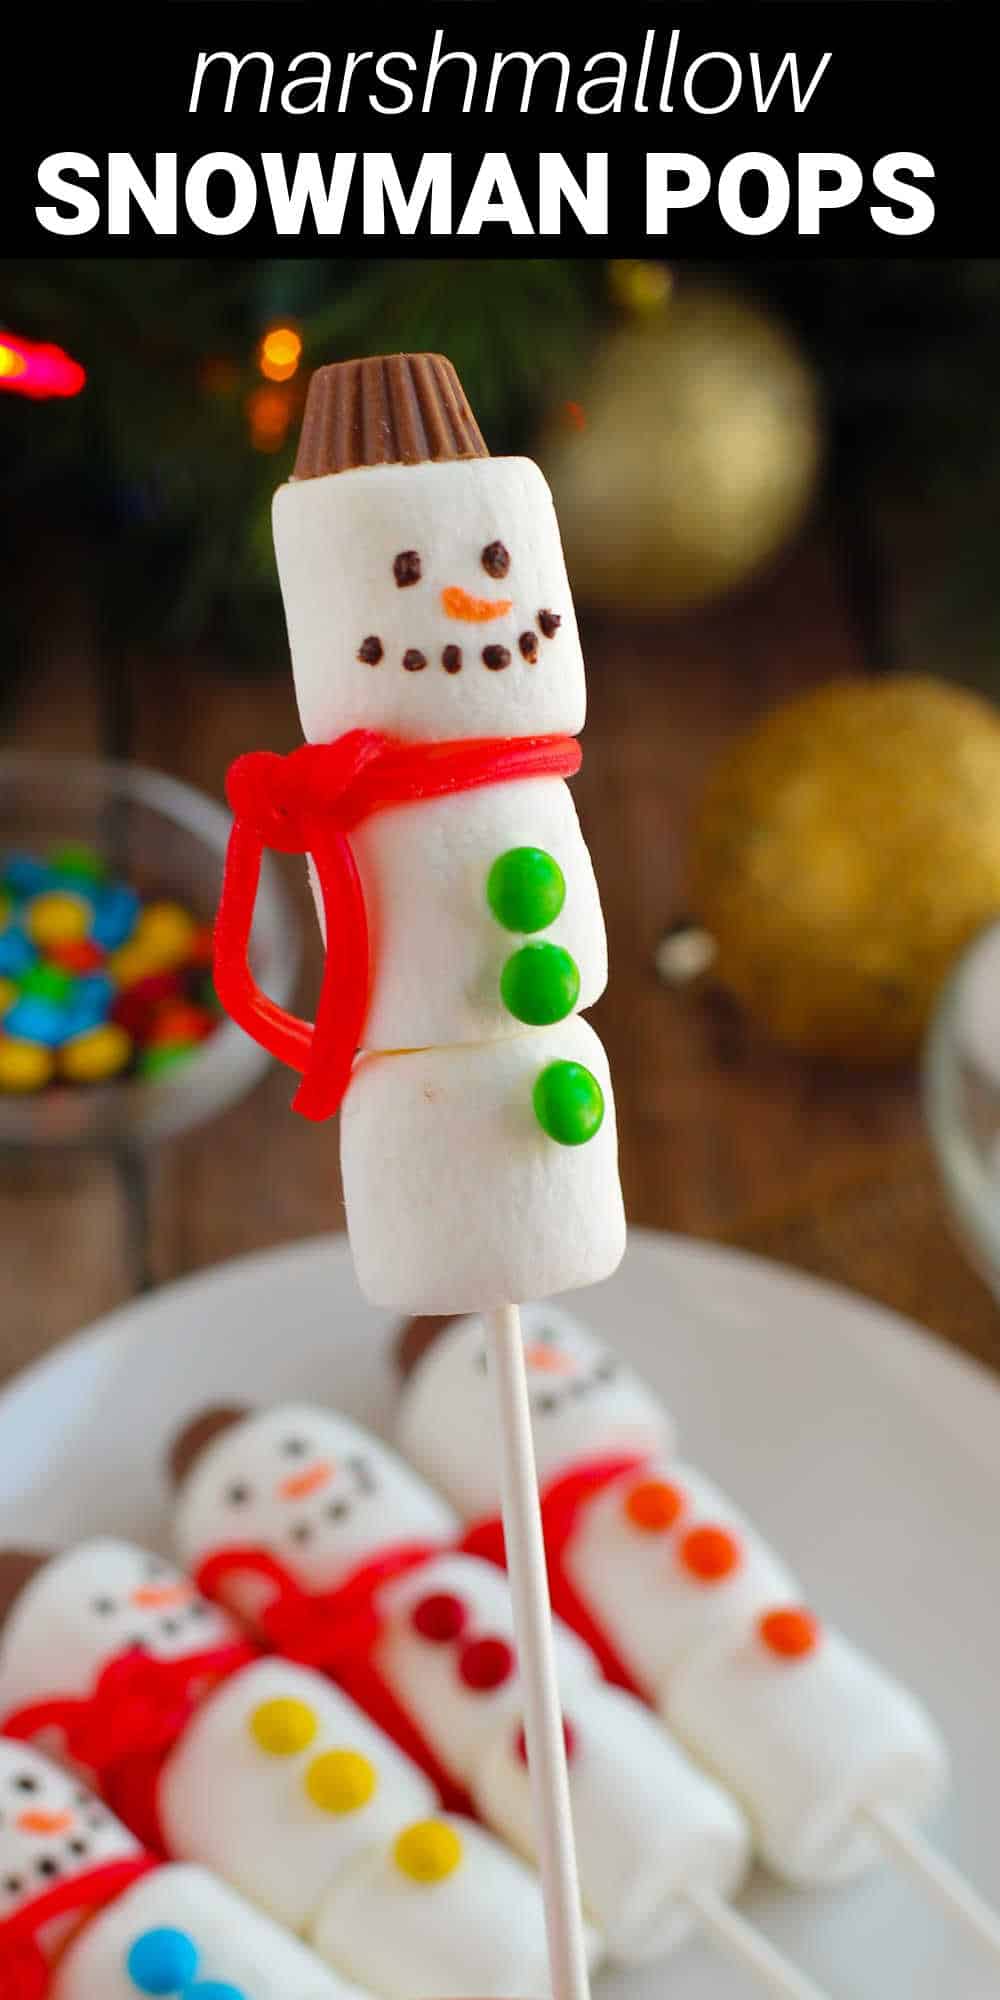 These cute snowman marshmallow pops are a fun and festive treat that the whole family will enjoy making. Marshmallow “snowballs” are placed on lollipop sticks and decorated with chocolate and candy to transform them into adorable snowmen. They’re just as much fun to make as real snowmen, and a whole lot tastier!